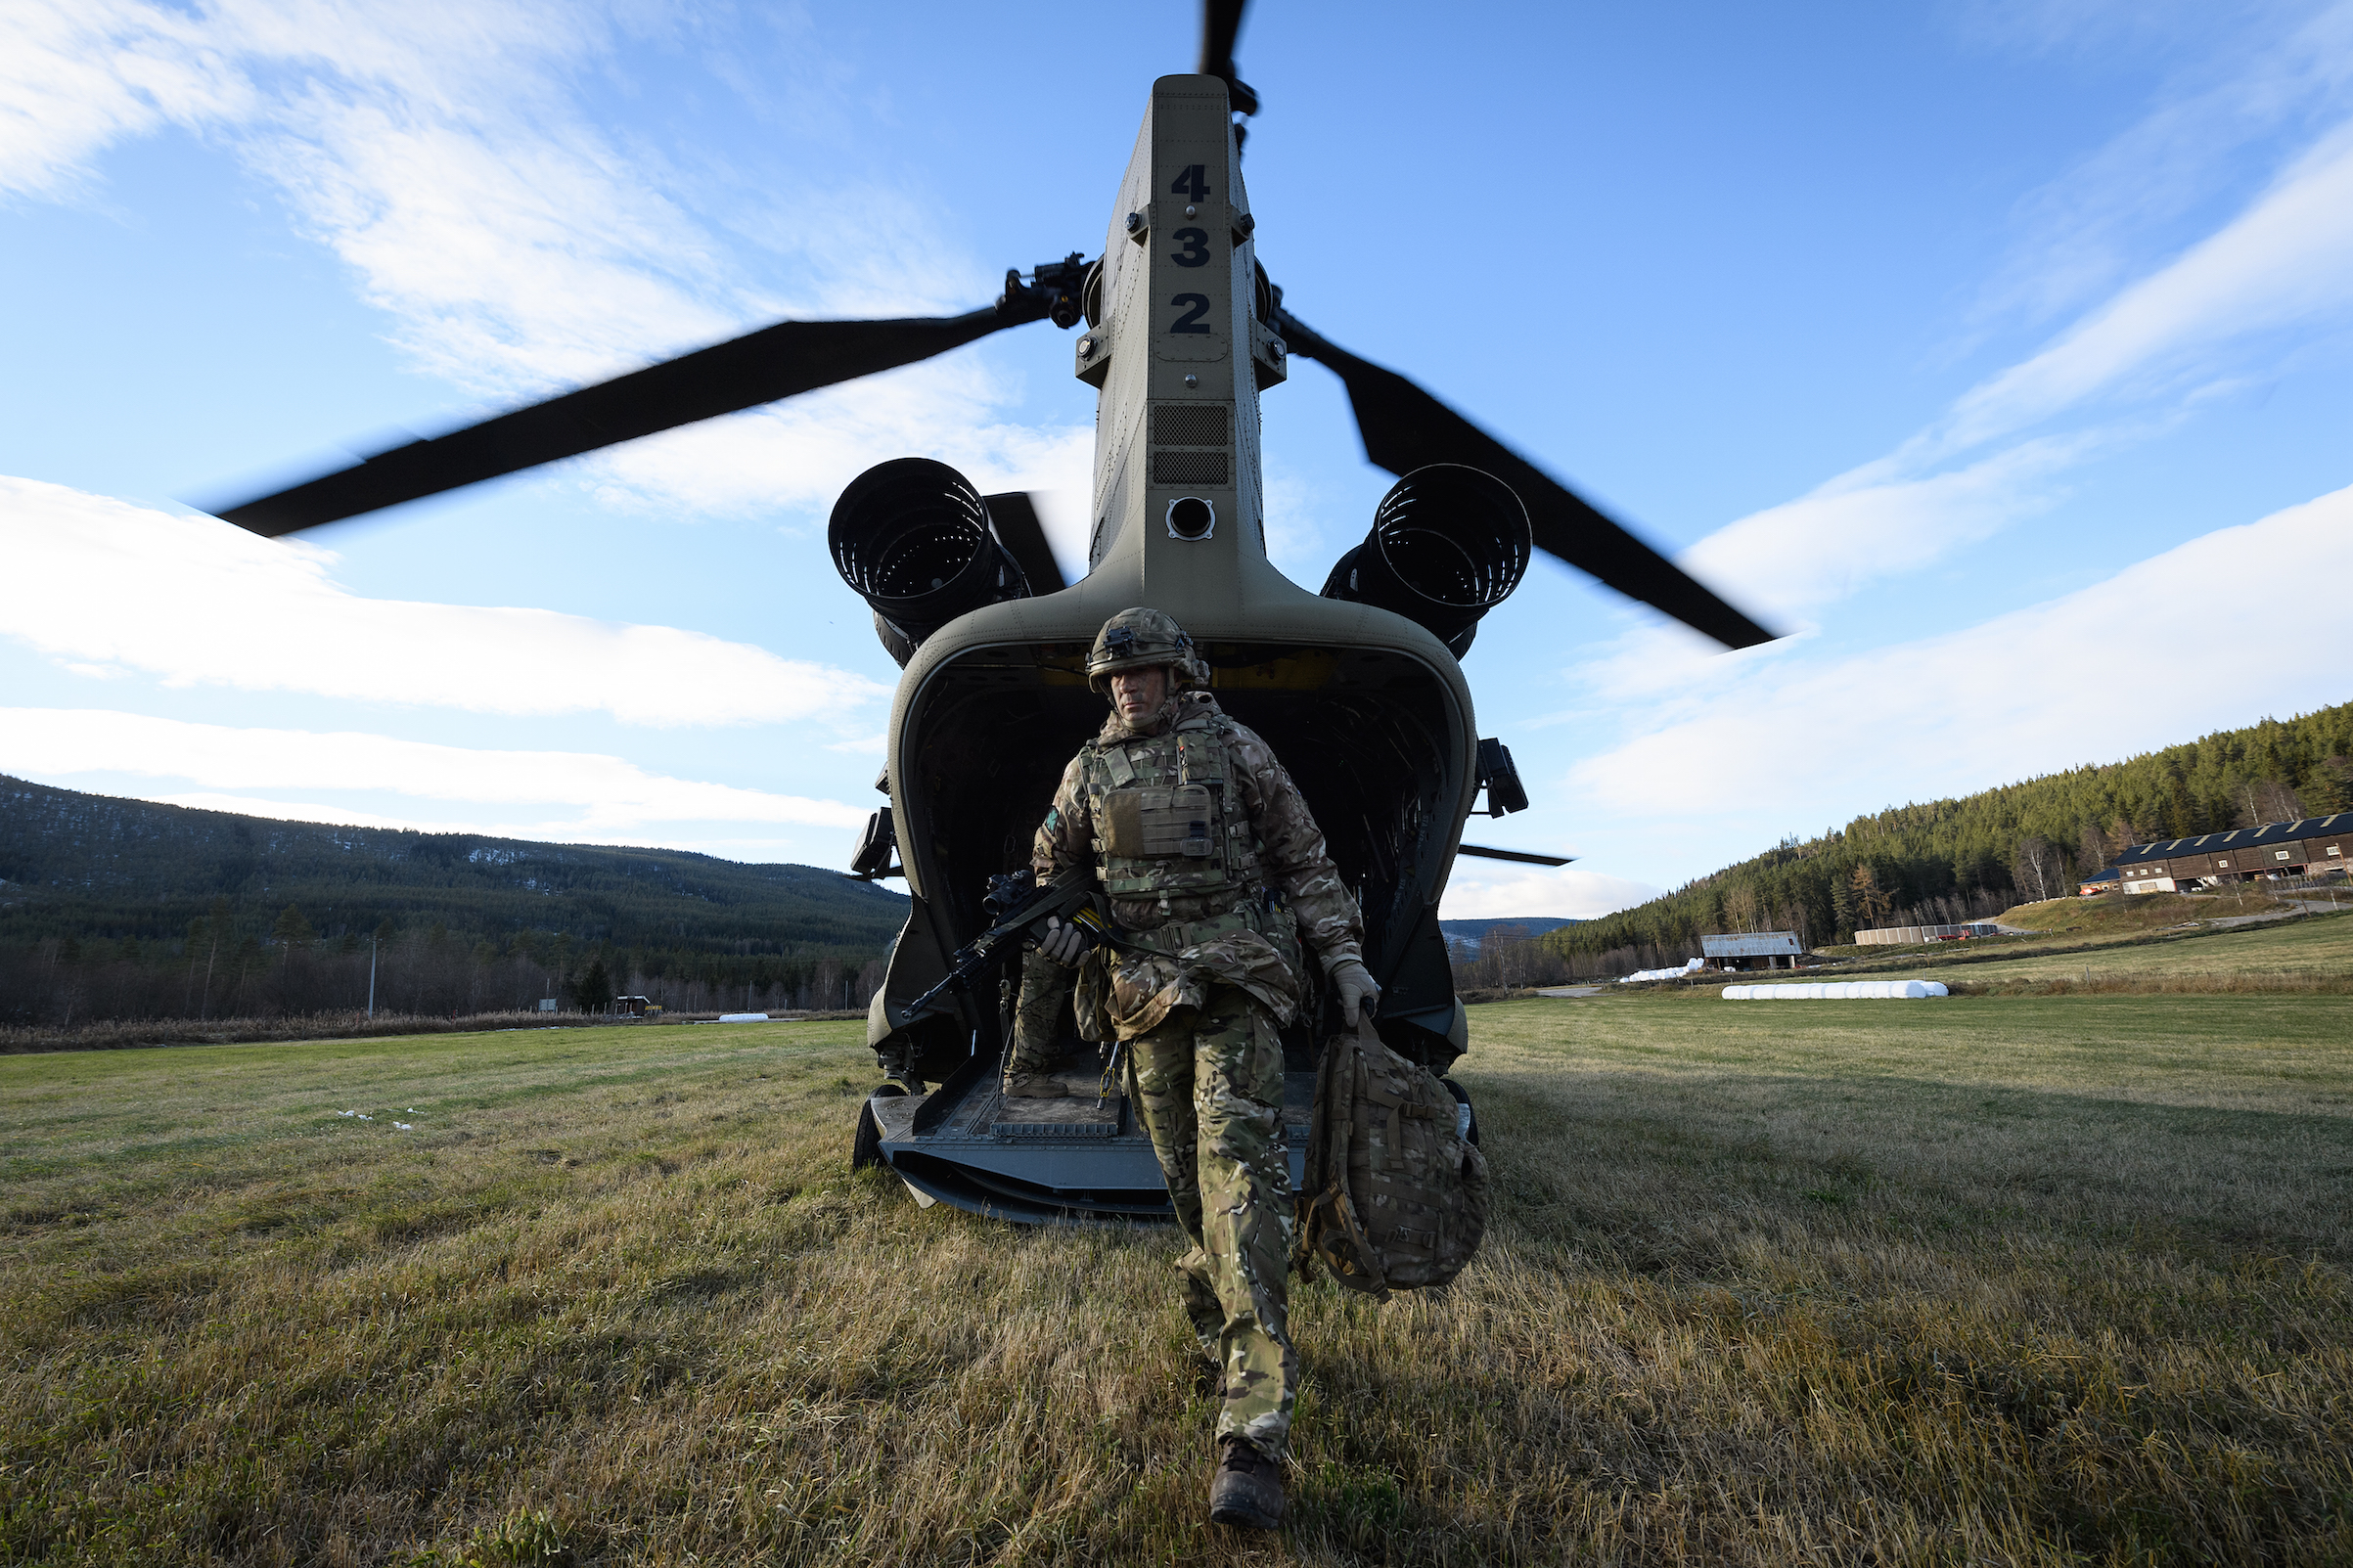 A British Army Brigade Commander disembarks from a United States Army Chinook CH-47 helicopter during a reconnaissance mission ahead of live exercise, on Oct. 27, 2018 in Alvdal, Norway. Over 40,000 participants from 31 nations will take part in the NATO 